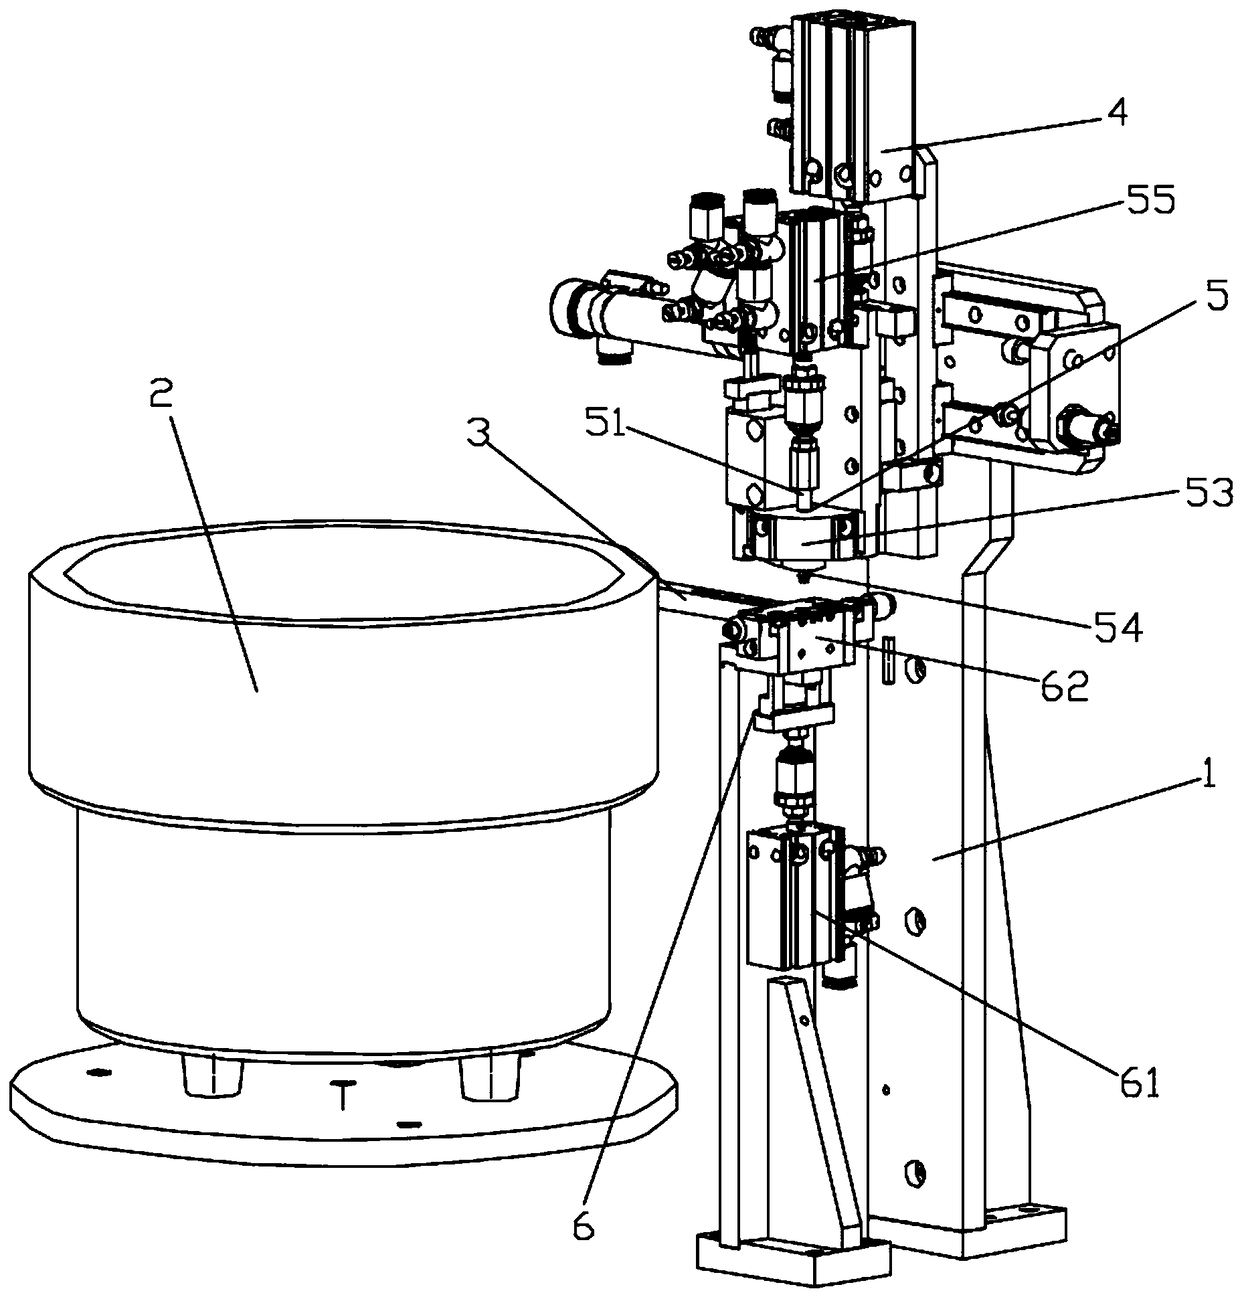 Mechanism for sleeving valve body with O-ring